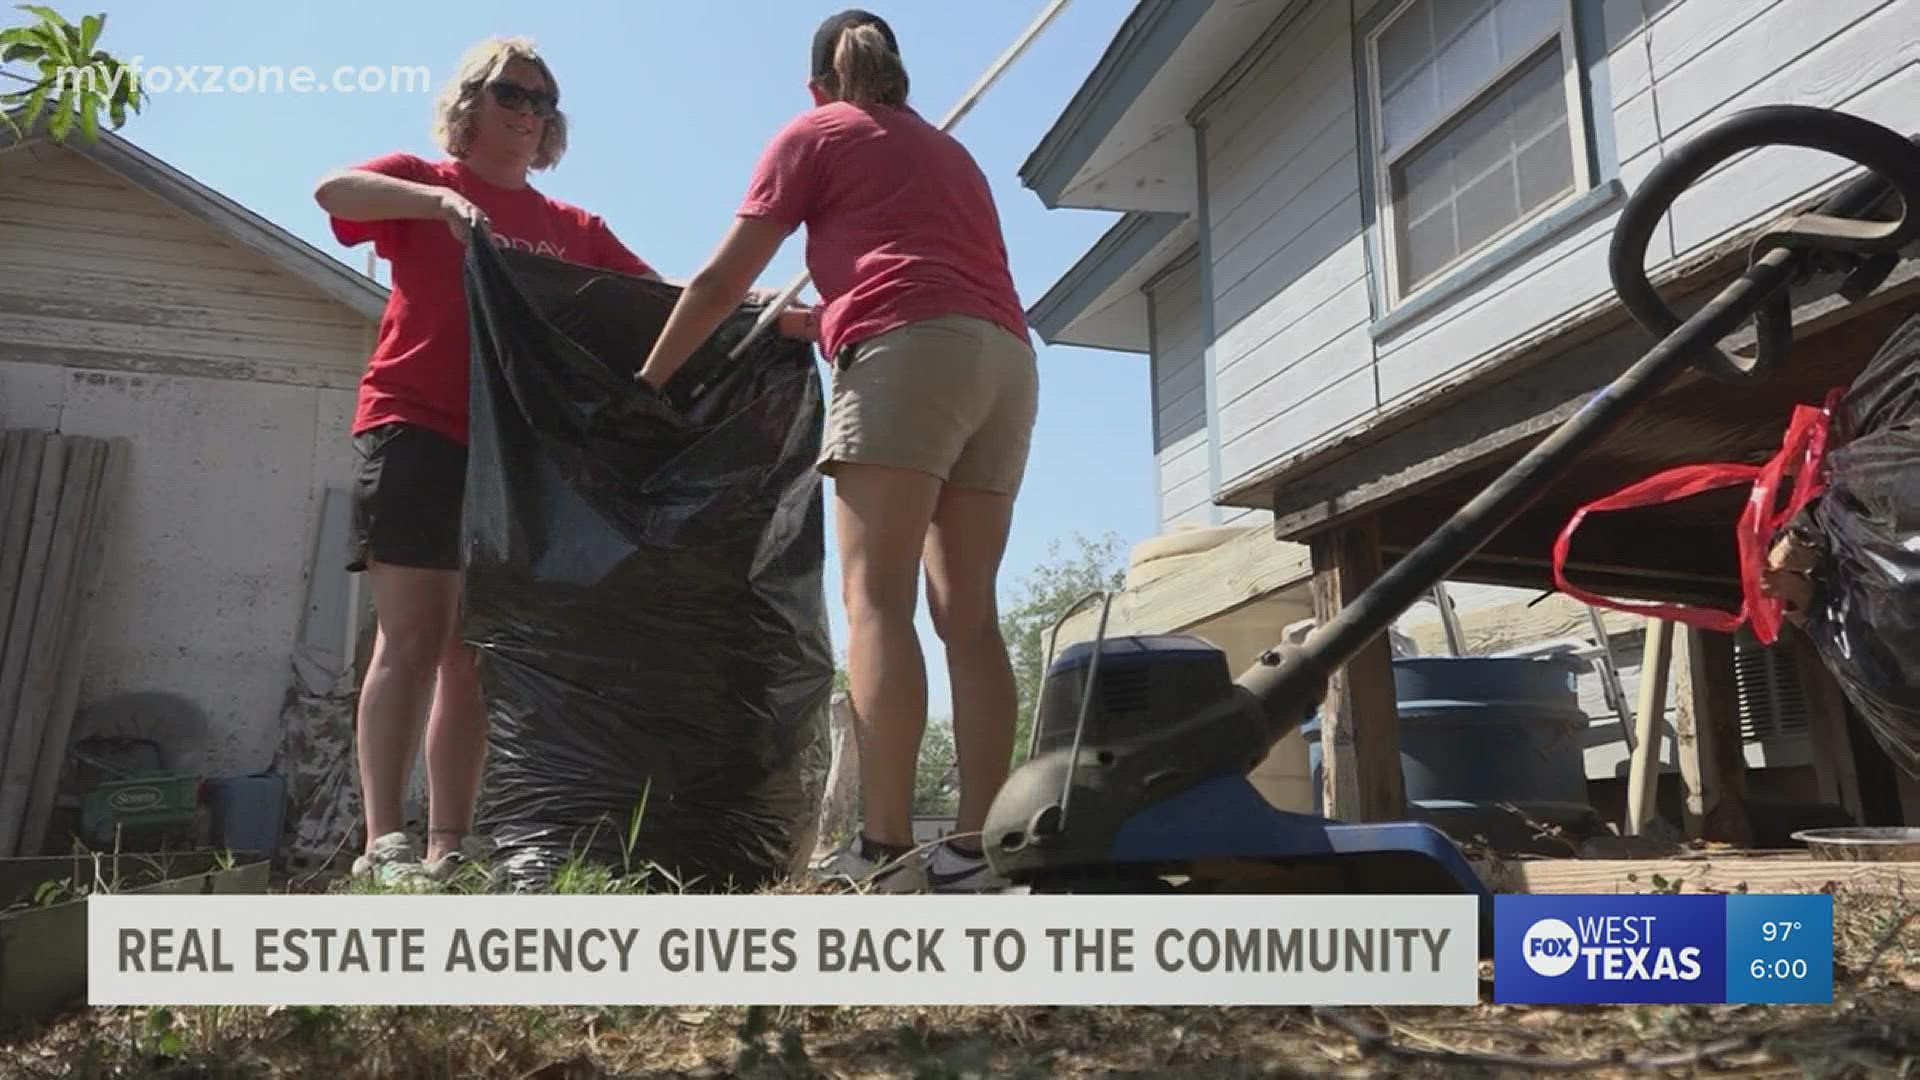 Keller Williams Realty team members completed service projects around San Angelo during the group's annual "Red Day".